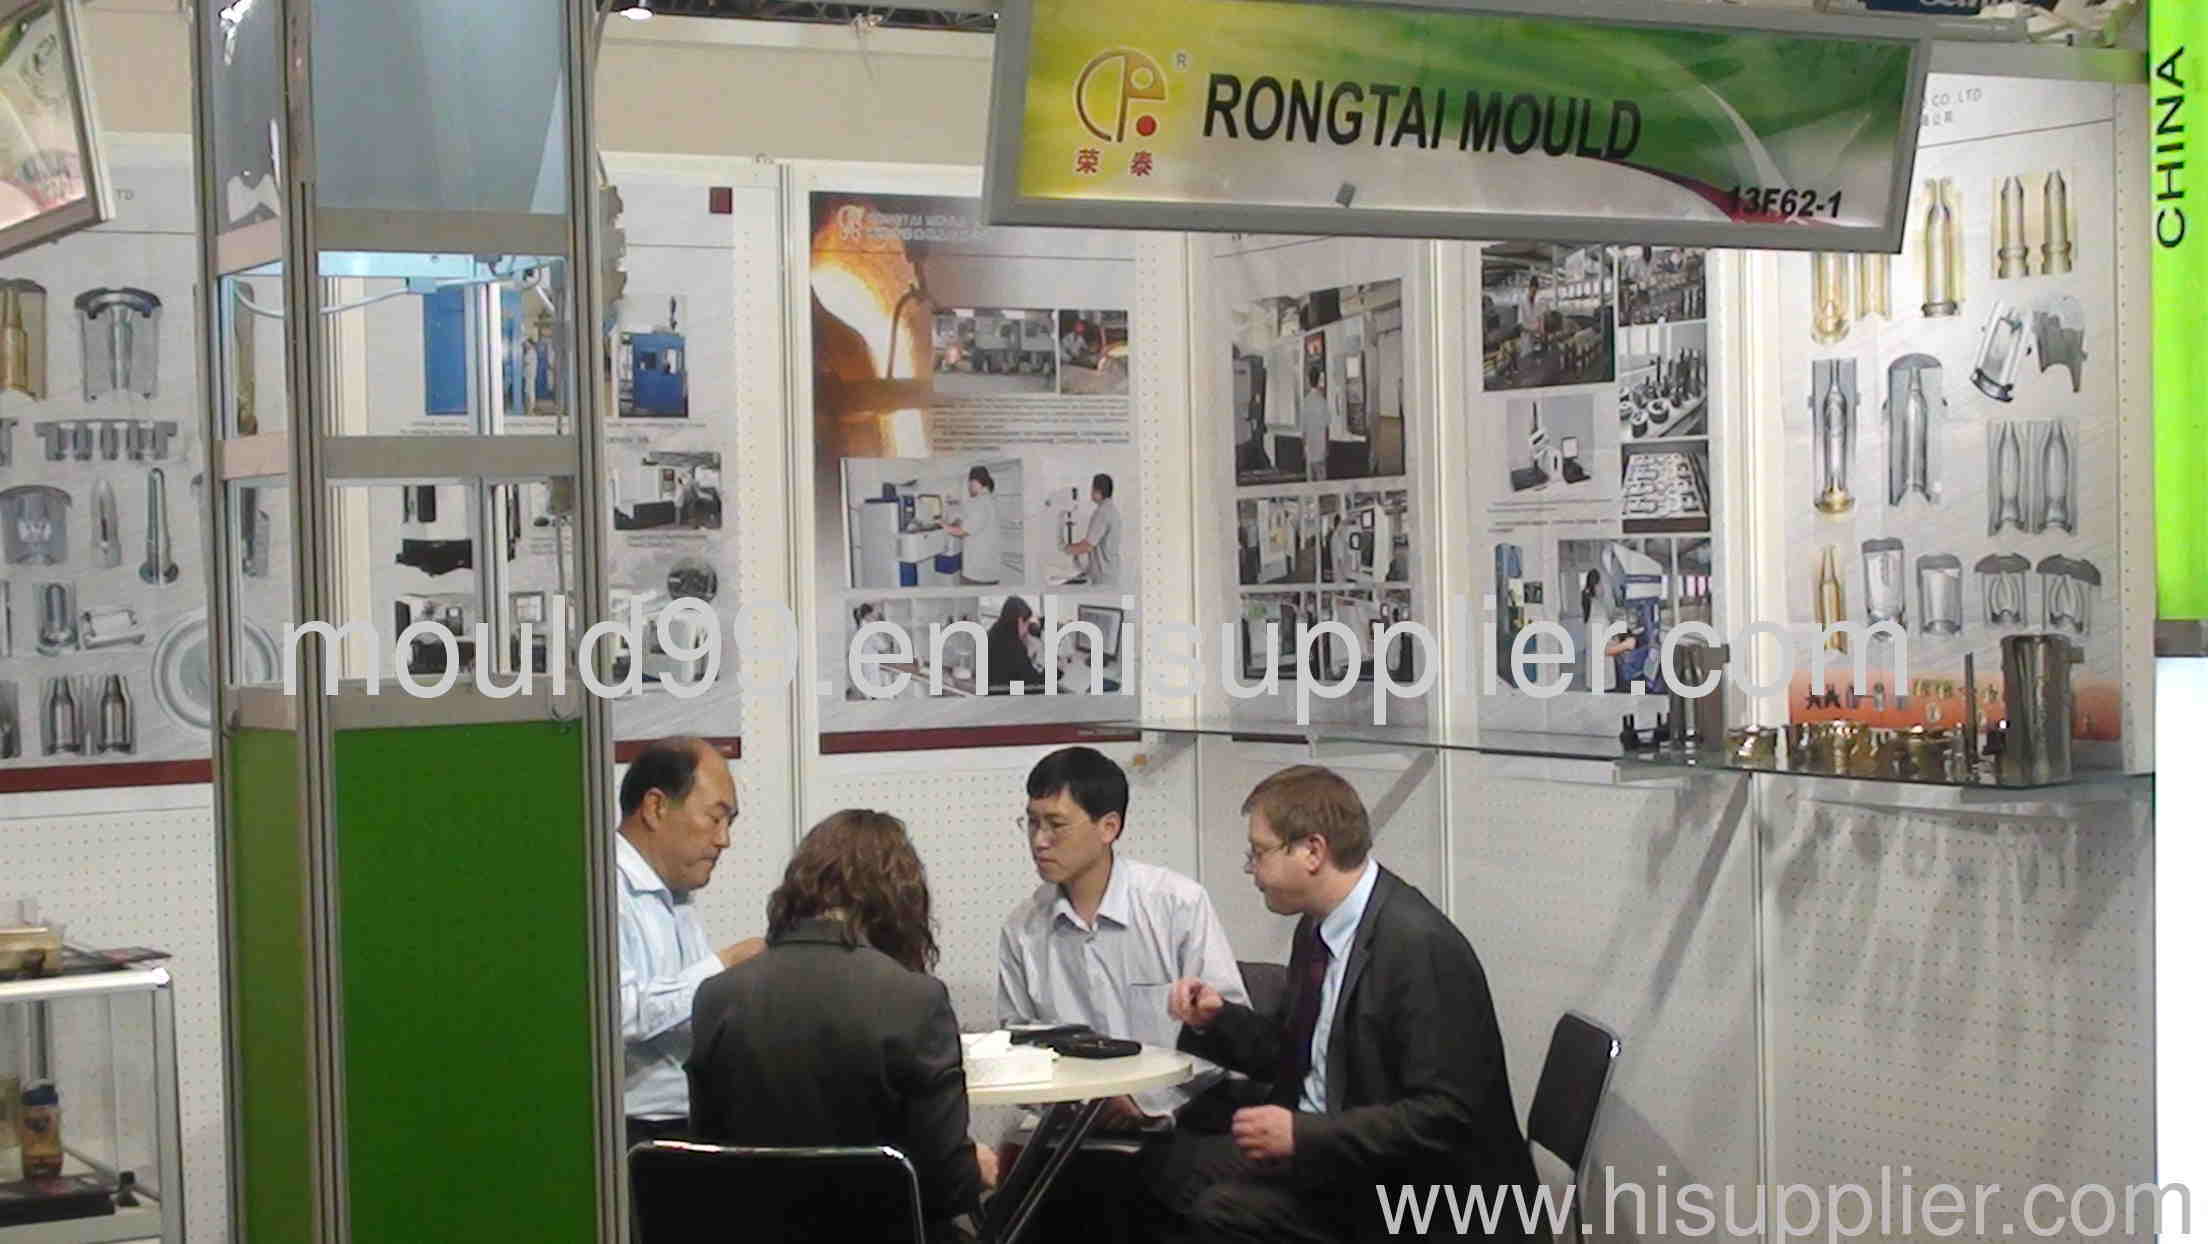 Rongtai Mould attended the 2012 Dusseldorf Glass Exhibition